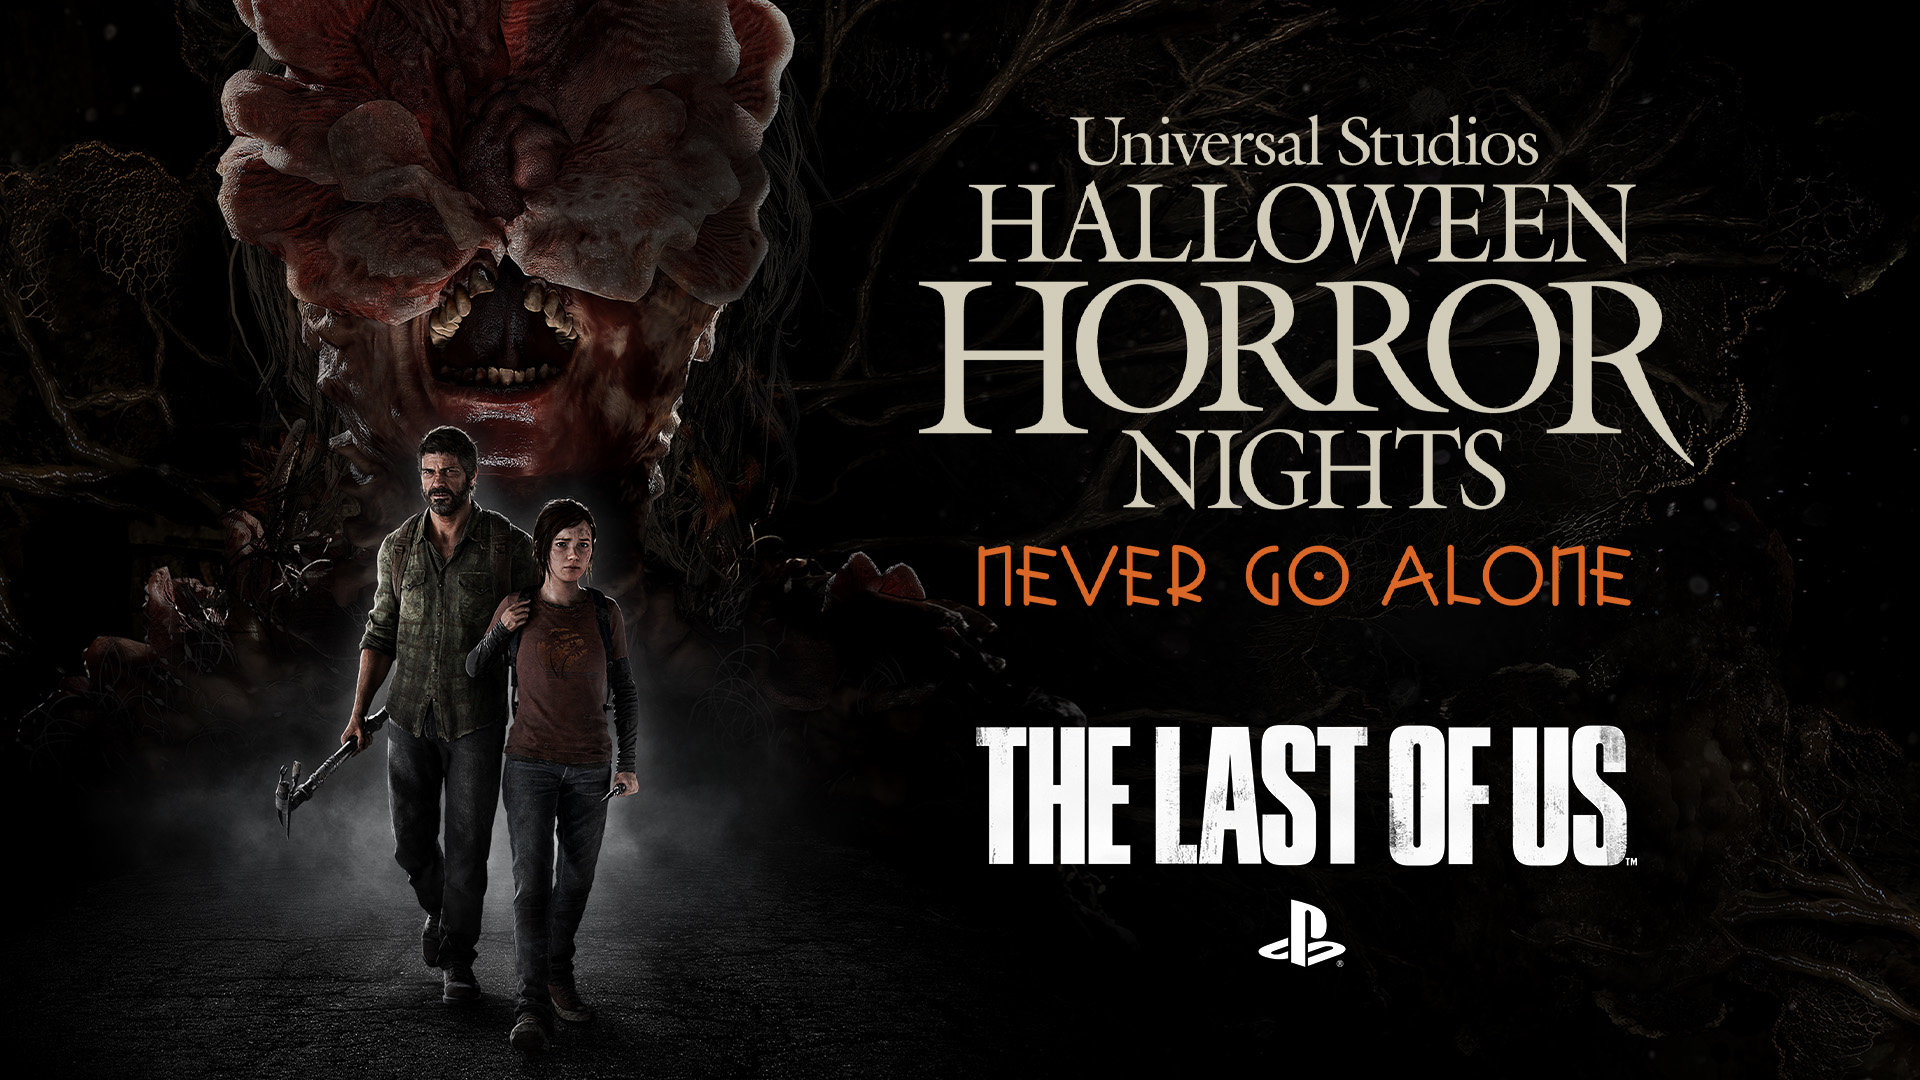 the last of us hhn poster